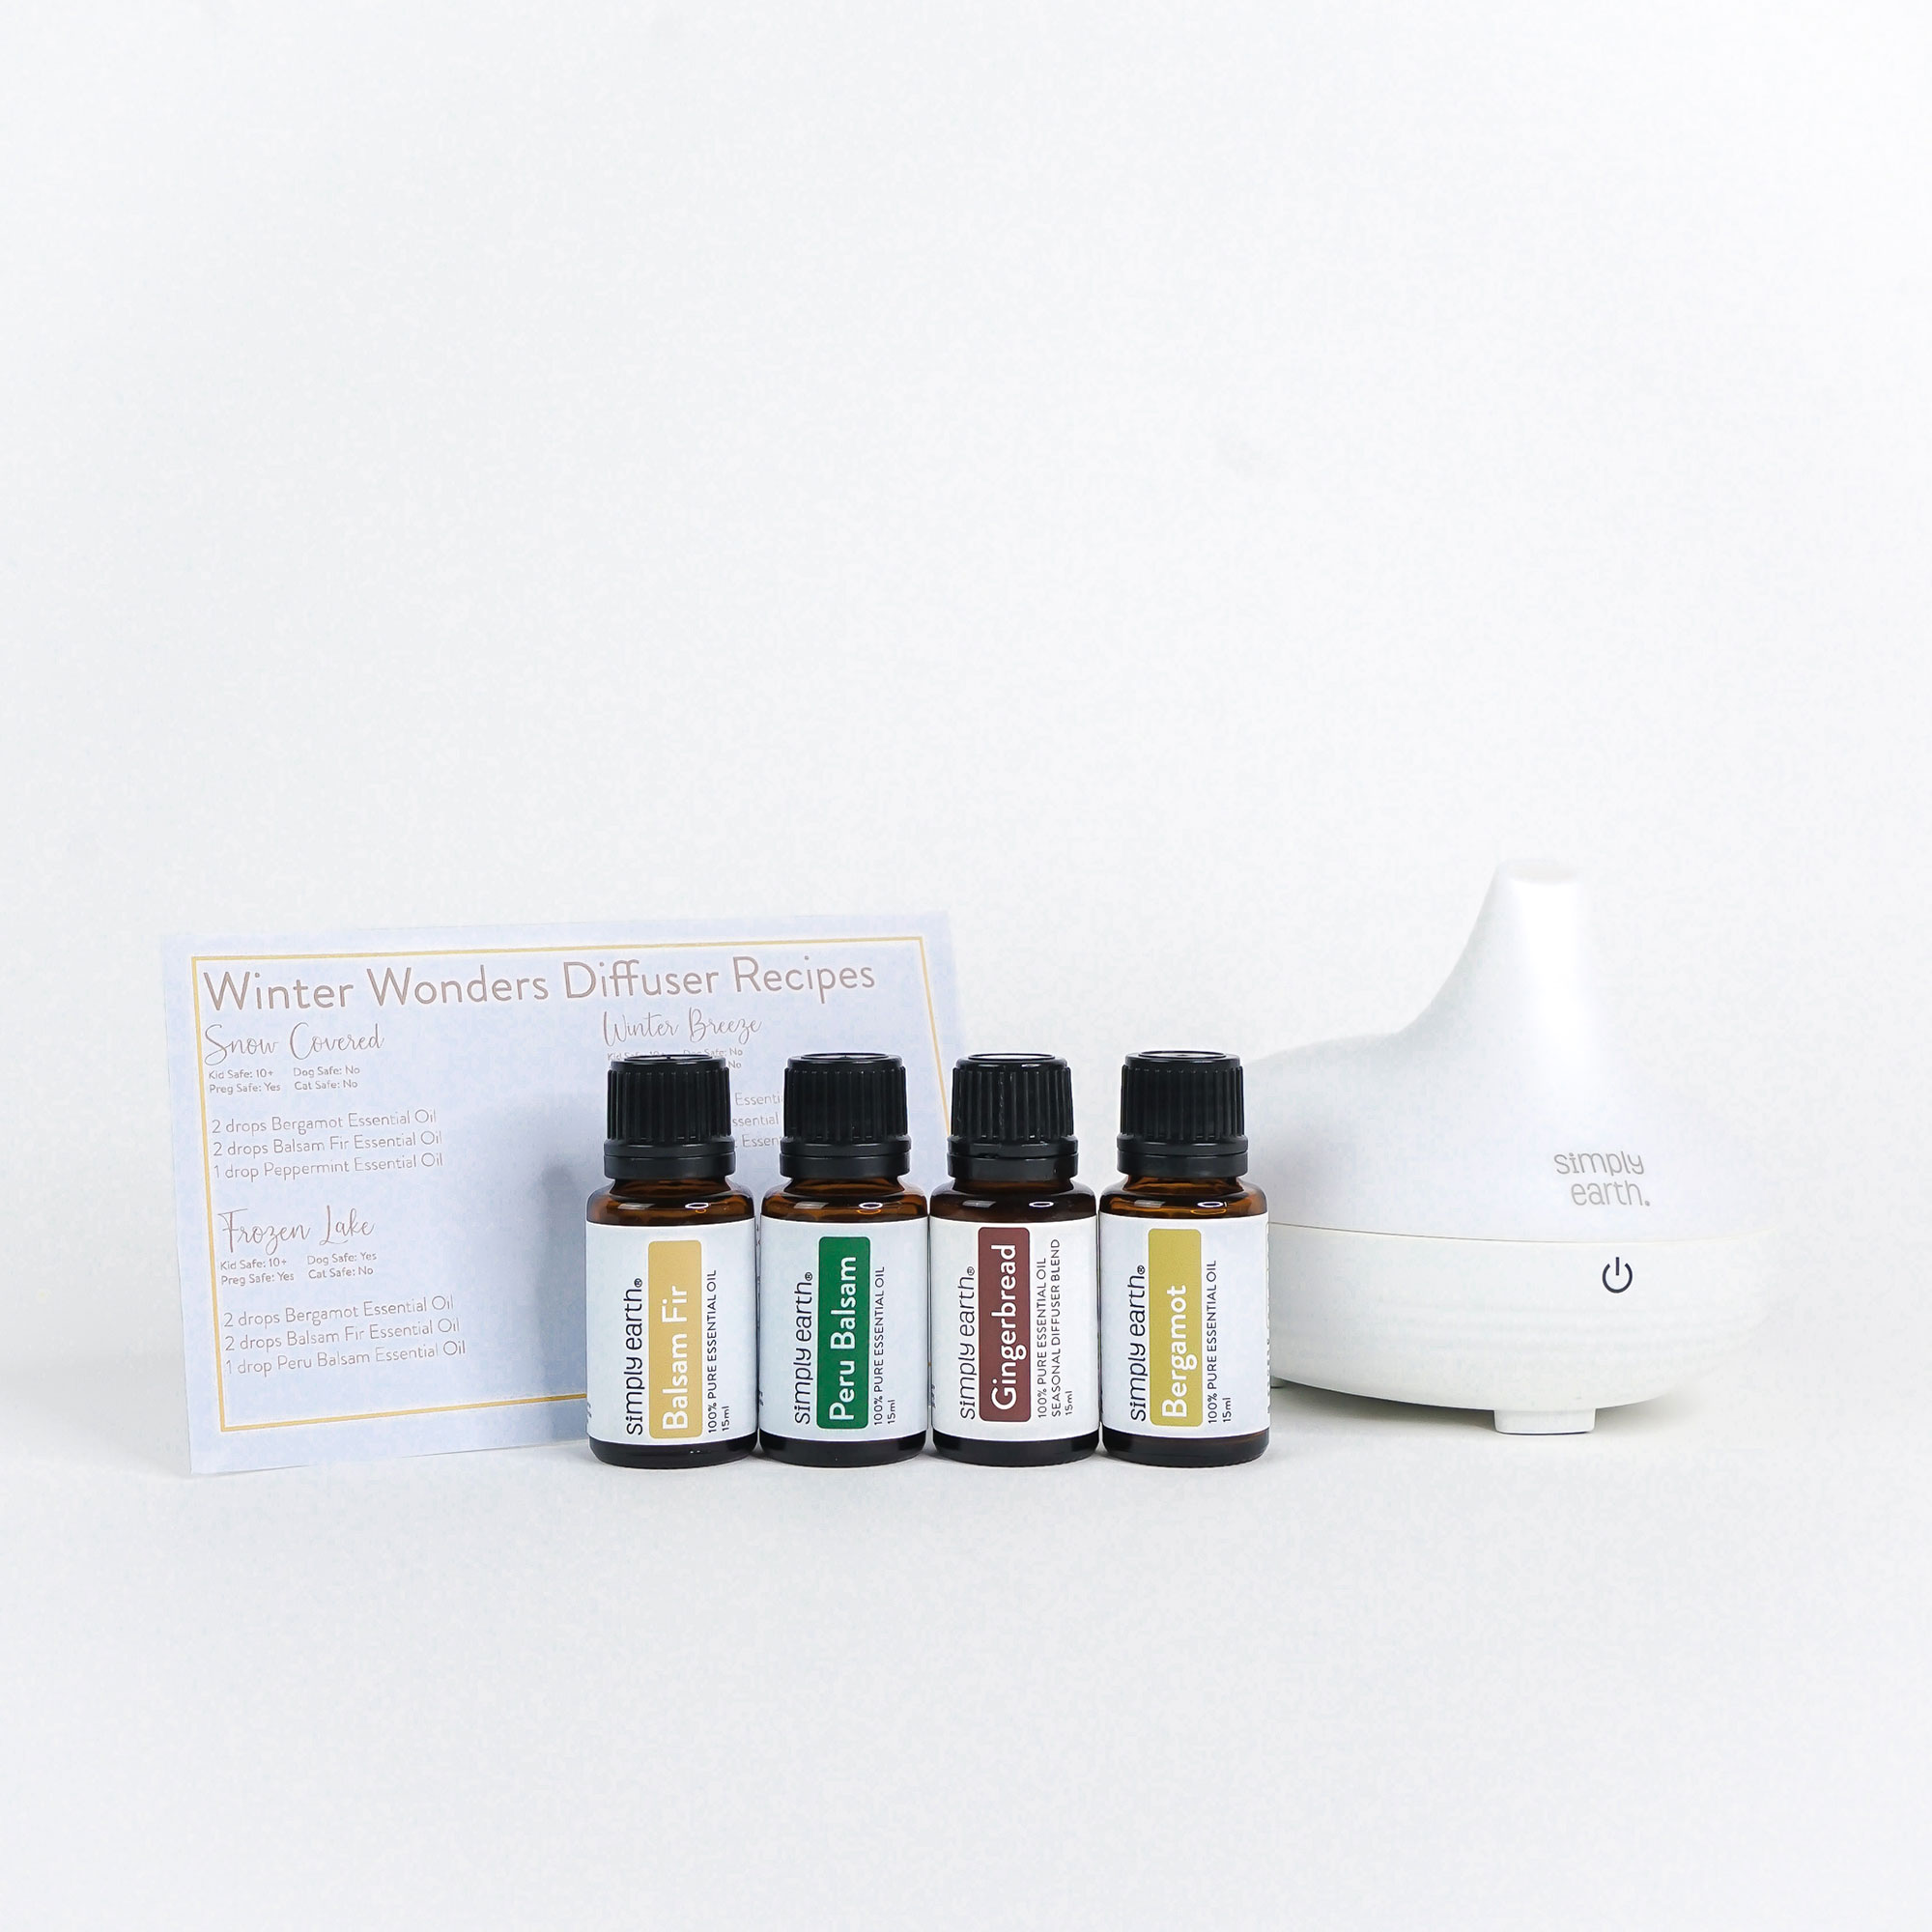 Winter Wonders Diffuser Set (4) Set:Deluxe (with diffuser)